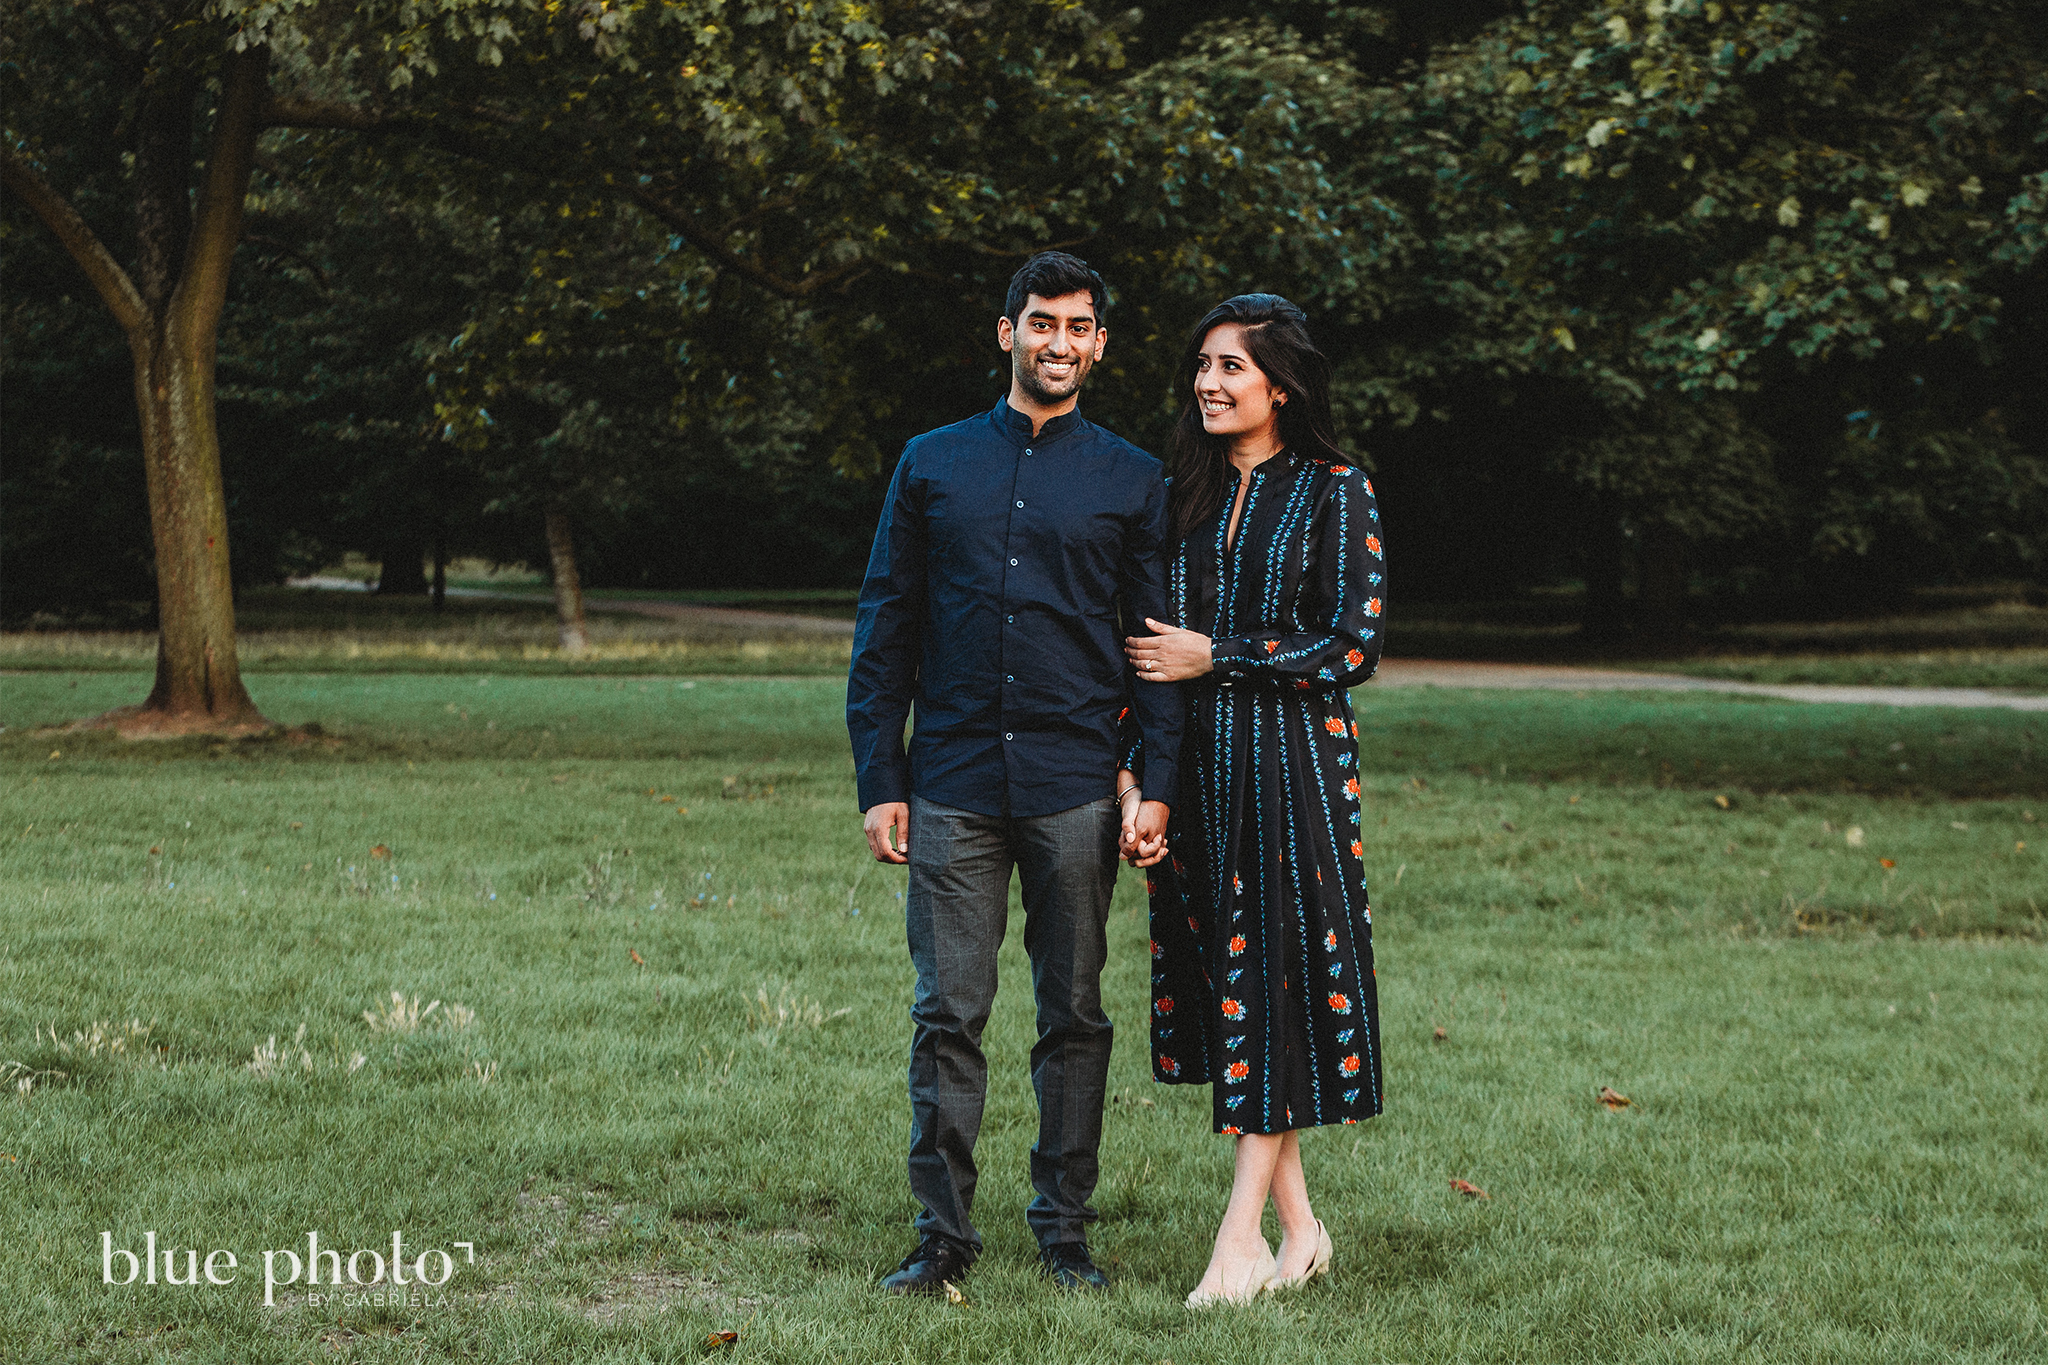 Engagement session in Kensingtom Gardens, Central London. A couple is smilling.  